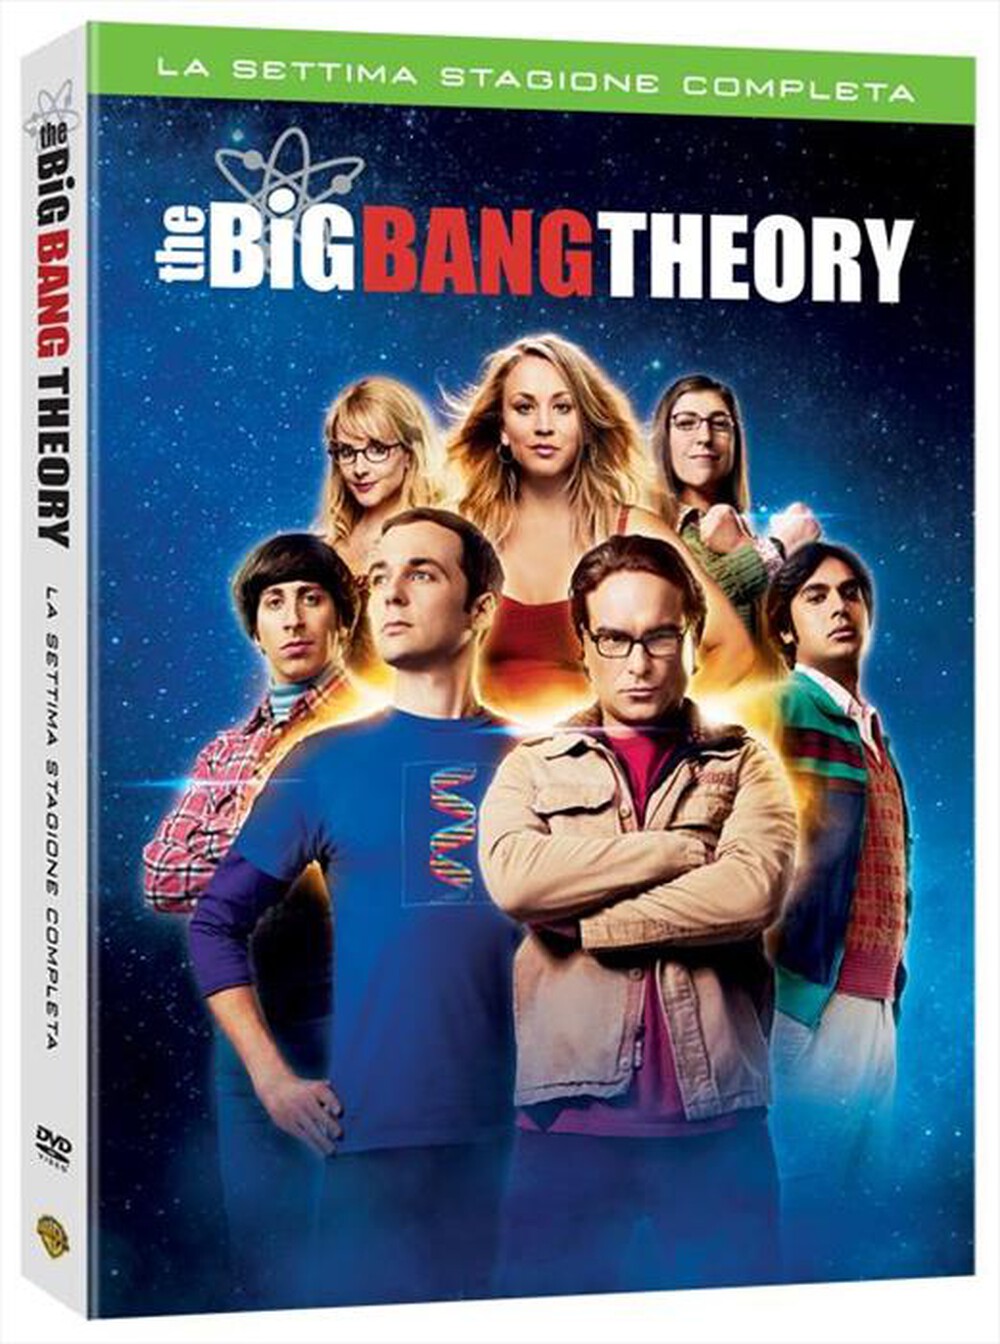 "WARNER HOME VIDEO - Big Bang Theory (The) - Stagione 07 (3 Dvd)"